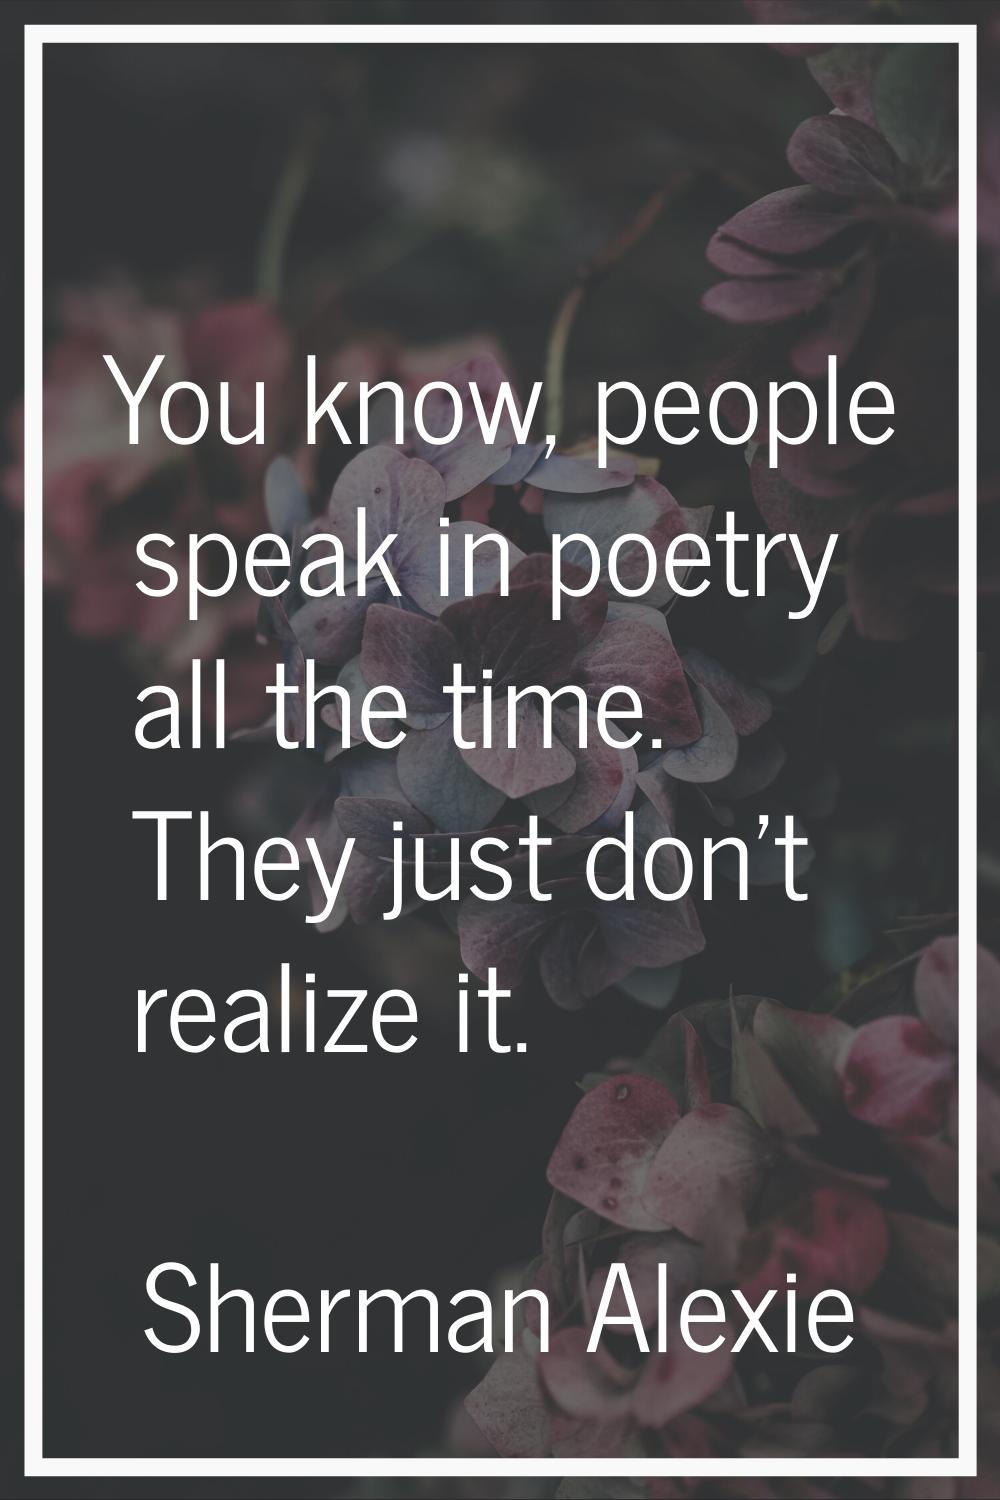 You know, people speak in poetry all the time. They just don't realize it.